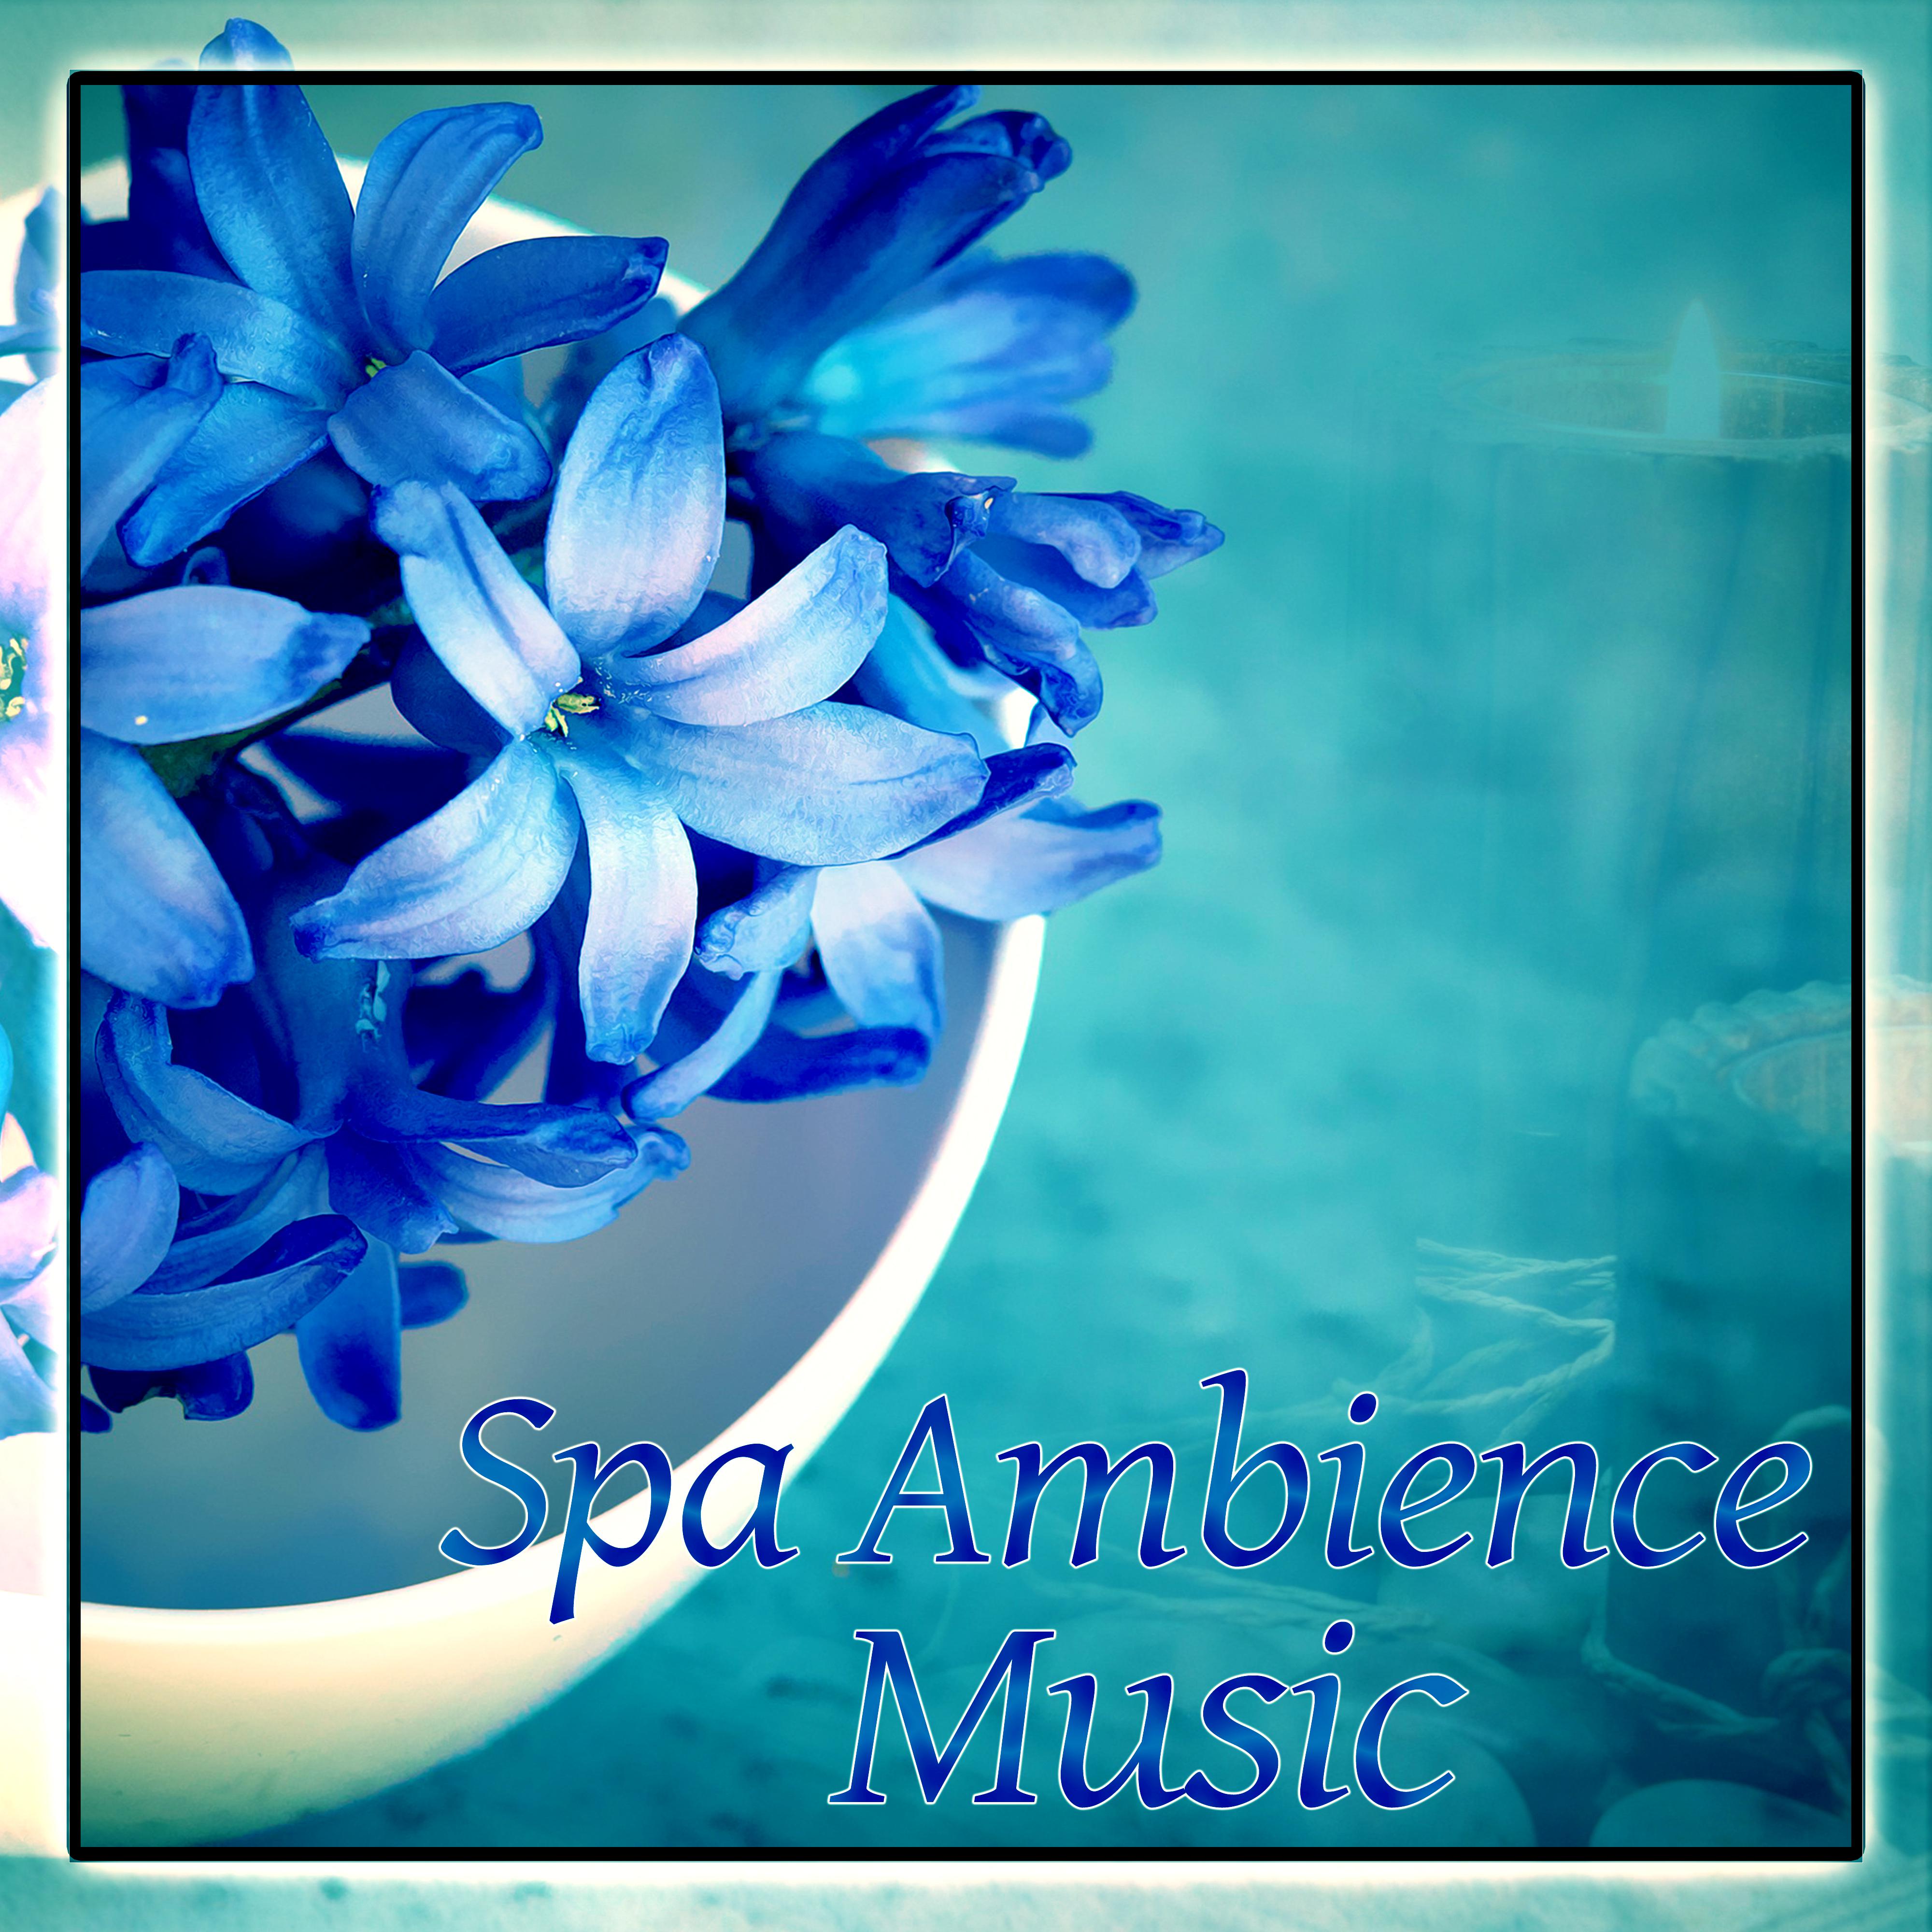 Spa Ambience Music  New Age Music for Feel Calmness, Peaceful while Spa Treatments, Soothing Sounds for Wellness, Bliss Spa